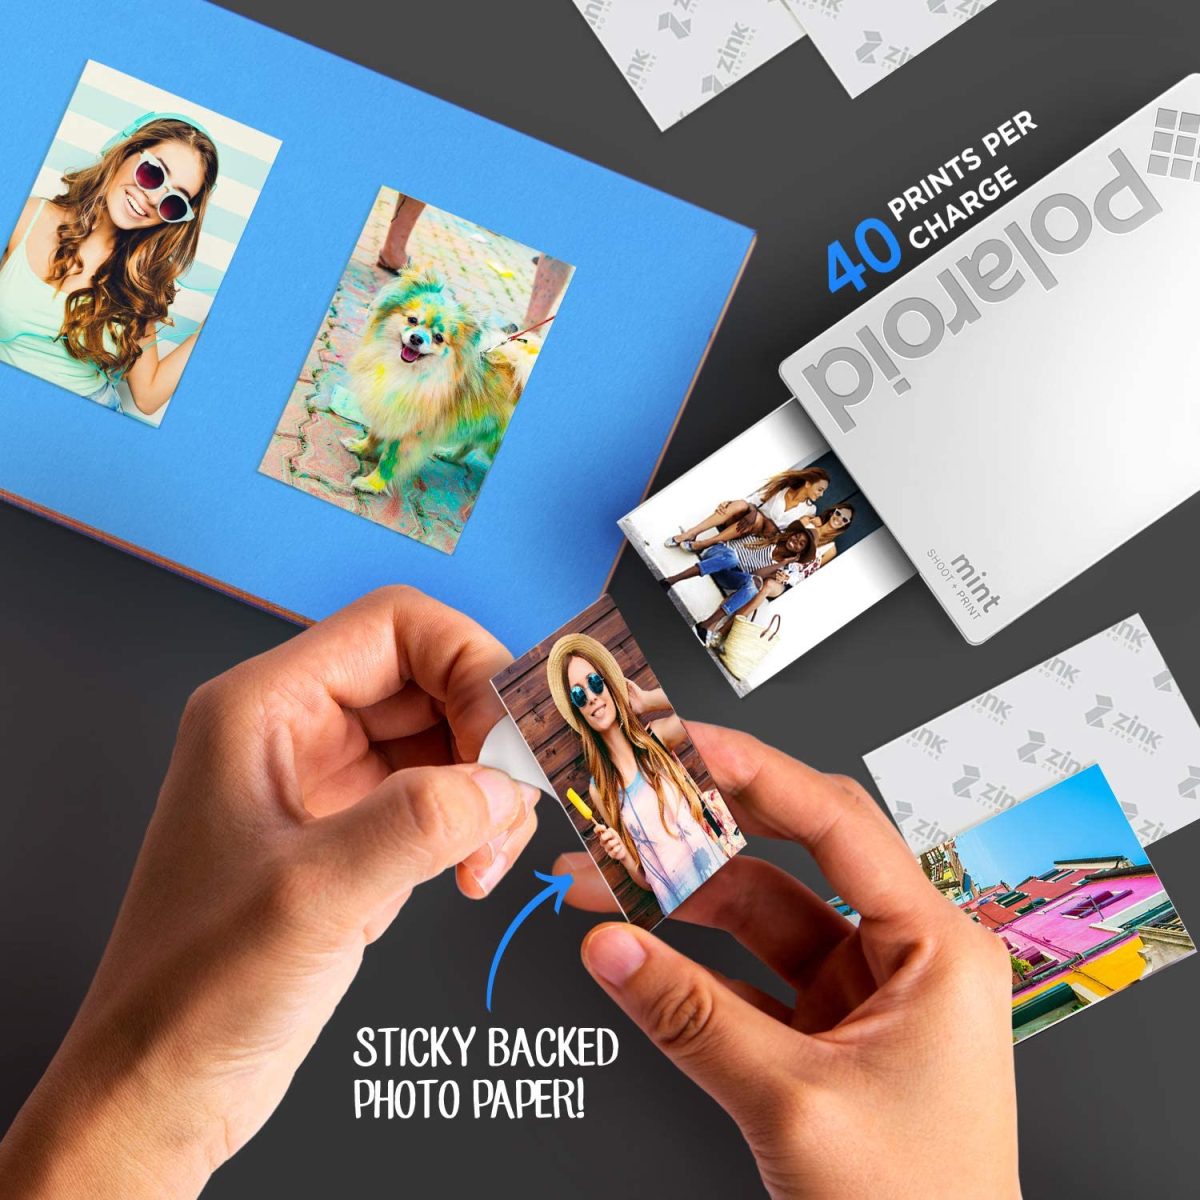 Polaroid Https://Www.youtube.com/Watch?V=Oqivlsmvng8 &Lt;Div Id=&Quot;Featurebullets_Feature_Div&Quot; Class=&Quot;Celwidget&Quot; Data-Feature-Name=&Quot;Featurebullets&Quot; Data-Cel-Widget=&Quot;Featurebullets_Feature_Div&Quot;&Gt; &Lt;Div Id=&Quot;Feature-Bullets&Quot; Class=&Quot;A-Section A-Spacing-Medium A-Spacing-Top-Small&Quot;&Gt; &Lt;Ul Class=&Quot;A-Unordered-List A-Vertical A-Spacing-Mini&Quot;&Gt; &Lt;Li&Gt;&Lt;Span Class=&Quot;A-List-Item&Quot;&Gt;Awesome Handheld Device Lets You Take 16 Megapixel Photographs &Amp; Print Instantly On 2X3 Inches Sticky Back Paper&Lt;/Span&Gt;&Lt;/Li&Gt; &Lt;Li&Gt;&Lt;Span Class=&Quot;A-List-Item&Quot;&Gt;Innovative Zero Ink Technology : There’s No Need For Pricy Toner; Zink Cartridges Combine Paper &Amp; Ink All; Packs Available In 20, 30 Or 50 Sheets&Lt;/Span&Gt;&Lt;/Li&Gt; &Lt;Li&Gt;&Lt;Span Class=&Quot;A-List-Item&Quot;&Gt;Unique Vertical Orientation : Modern Design Lets You Snap Upright, Just Like A Smartphone&Lt;/Span&Gt;&Lt;/Li&Gt; &Lt;Li&Gt;&Lt;Span Class=&Quot;A-List-Item&Quot;&Gt;A Mode For Every Mood : Simple Operation &Amp; Design Includes [6] Easy Picture Settings; Choose From Vibrant Color, Black &Amp; White Or Vintage Effect&Lt;/Span&Gt;&Lt;/Li&Gt; &Lt;Li&Gt;&Lt;Span Class=&Quot;A-List-Item&Quot;&Gt;Fashion Forward &Amp; Travel Friendly : Pick From [5] Fabulously Vibrant Colors; Pocket Sized Camera Measures 4. 6 X 3. 1 X 0. 8 Inches &Amp; Weighs Only 6 Ounces&Lt;/Span&Gt;&Lt;/Li&Gt; &Lt;Li&Gt;&Lt;Span Class=&Quot;A-List-Item&Quot;&Gt;Viewfinder Type: Optical&Lt;/Span&Gt;&Lt;/Li&Gt; &Lt;/Ul&Gt; &Lt;/Div&Gt; &Lt;/Div&Gt; Polaroid Mint Instant Print Digital Camera -Yellow